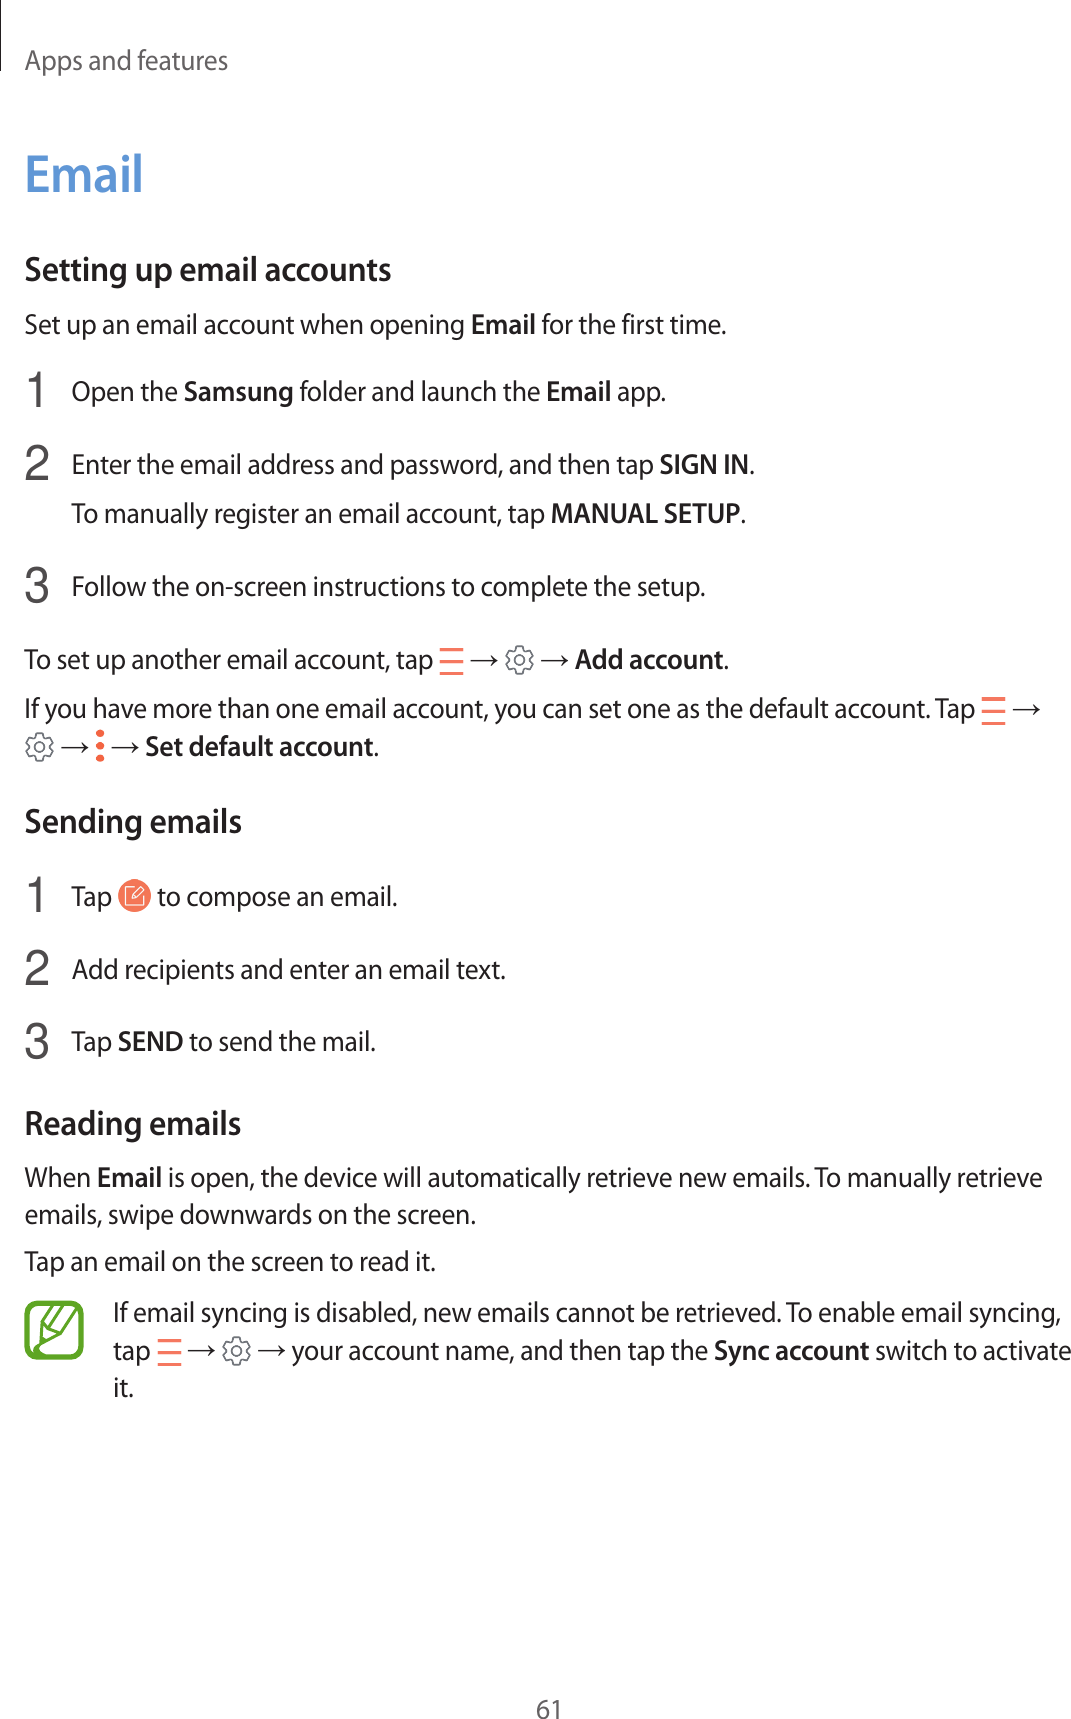 Apps and features61EmailSetting up email accountsSet up an email account when opening Email for the first time.1  Open the Samsung folder and launch the Email app.2  Enter the email address and password, and then tap SIGN IN.To manually register an email account, tap MANUAL SETUP.3  Follow the on-screen instructions to complete the setup.To set up another email account, tap   →   → Add account.If you have more than one email account, you can set one as the default account. Tap   →  →   → Set default account.Sending emails1  Tap   to compose an email.2  Add recipients and enter an email text.3  Tap SEND to send the mail.Reading emailsWhen Email is open, the device will automatically retrieve new emails. To manually retrieve emails, swipe downwards on the screen.Tap an email on the screen to read it.If email syncing is disabled, new emails cannot be retrieved. To enable email syncing, tap   →   → your account name, and then tap the Sync account switch to activate it.